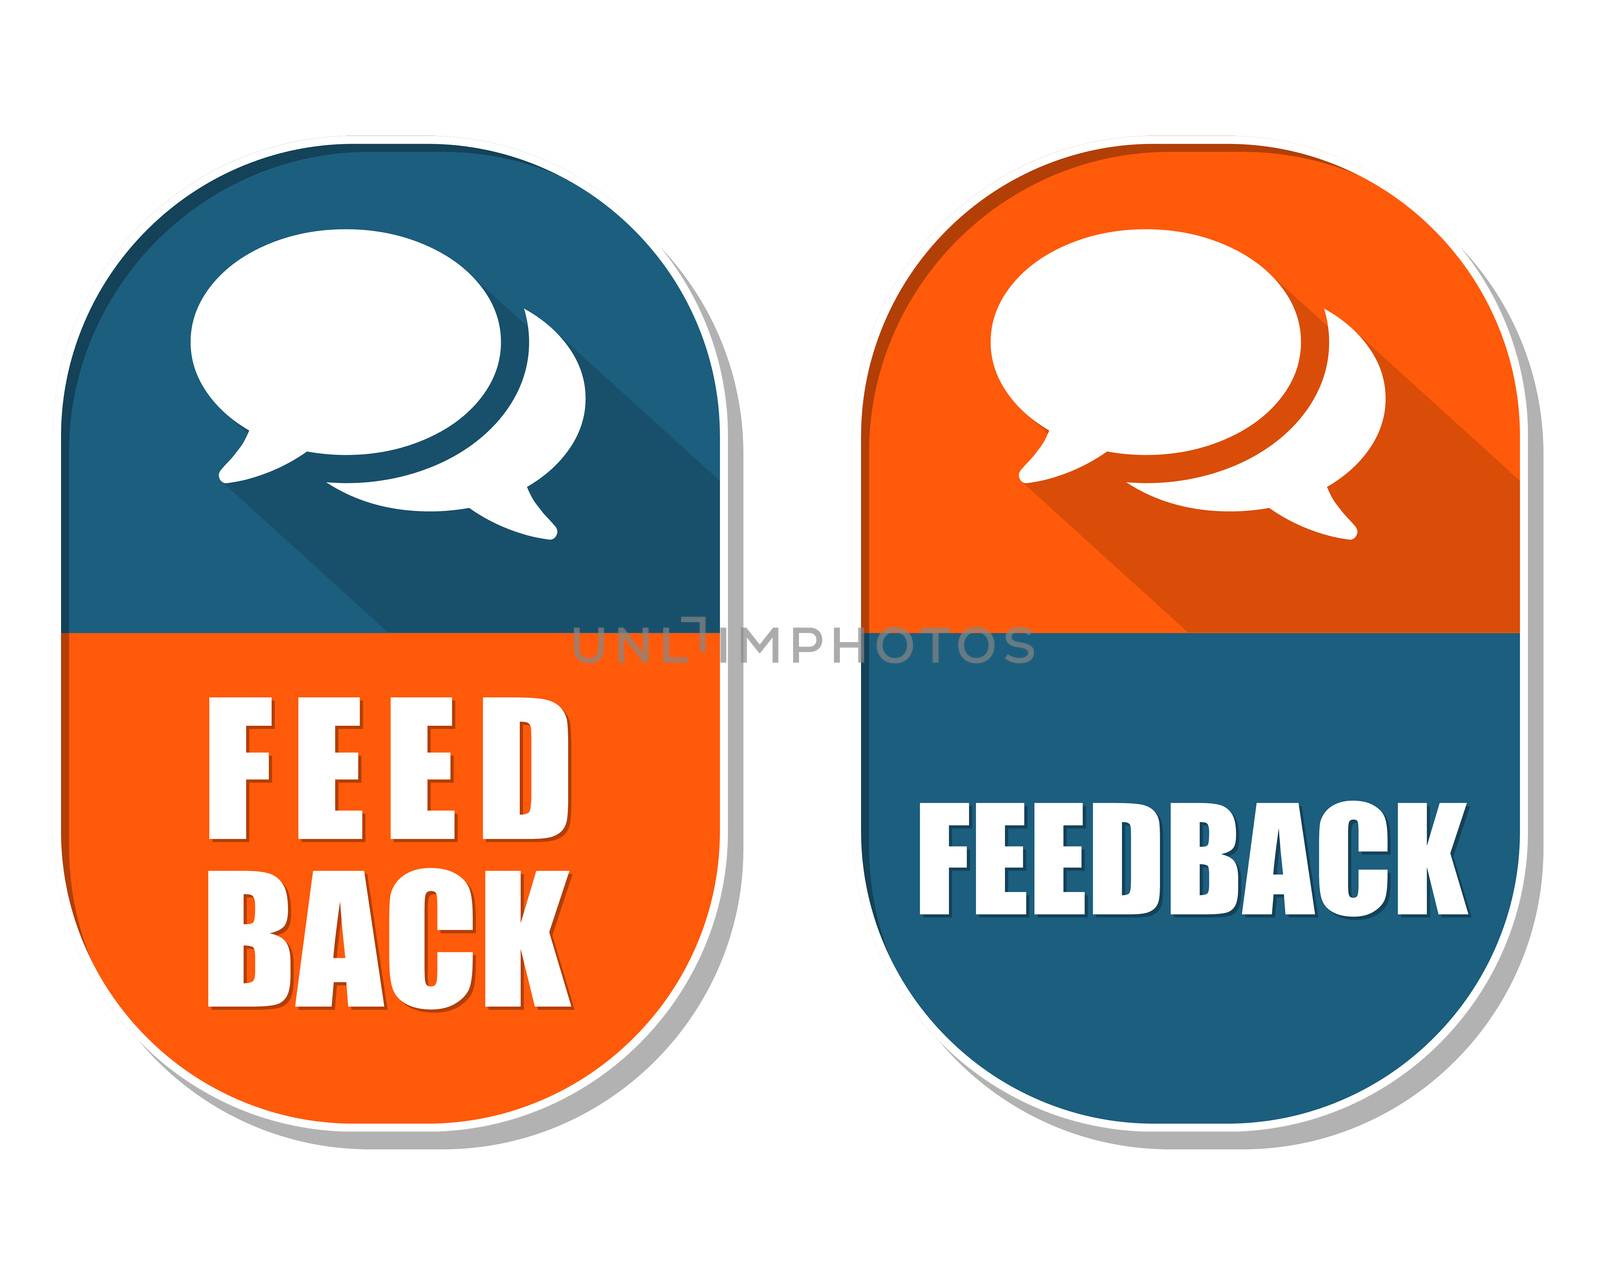 feedback and speech bubbles symbols, two elliptic flat design labels with icons, business and communication concept